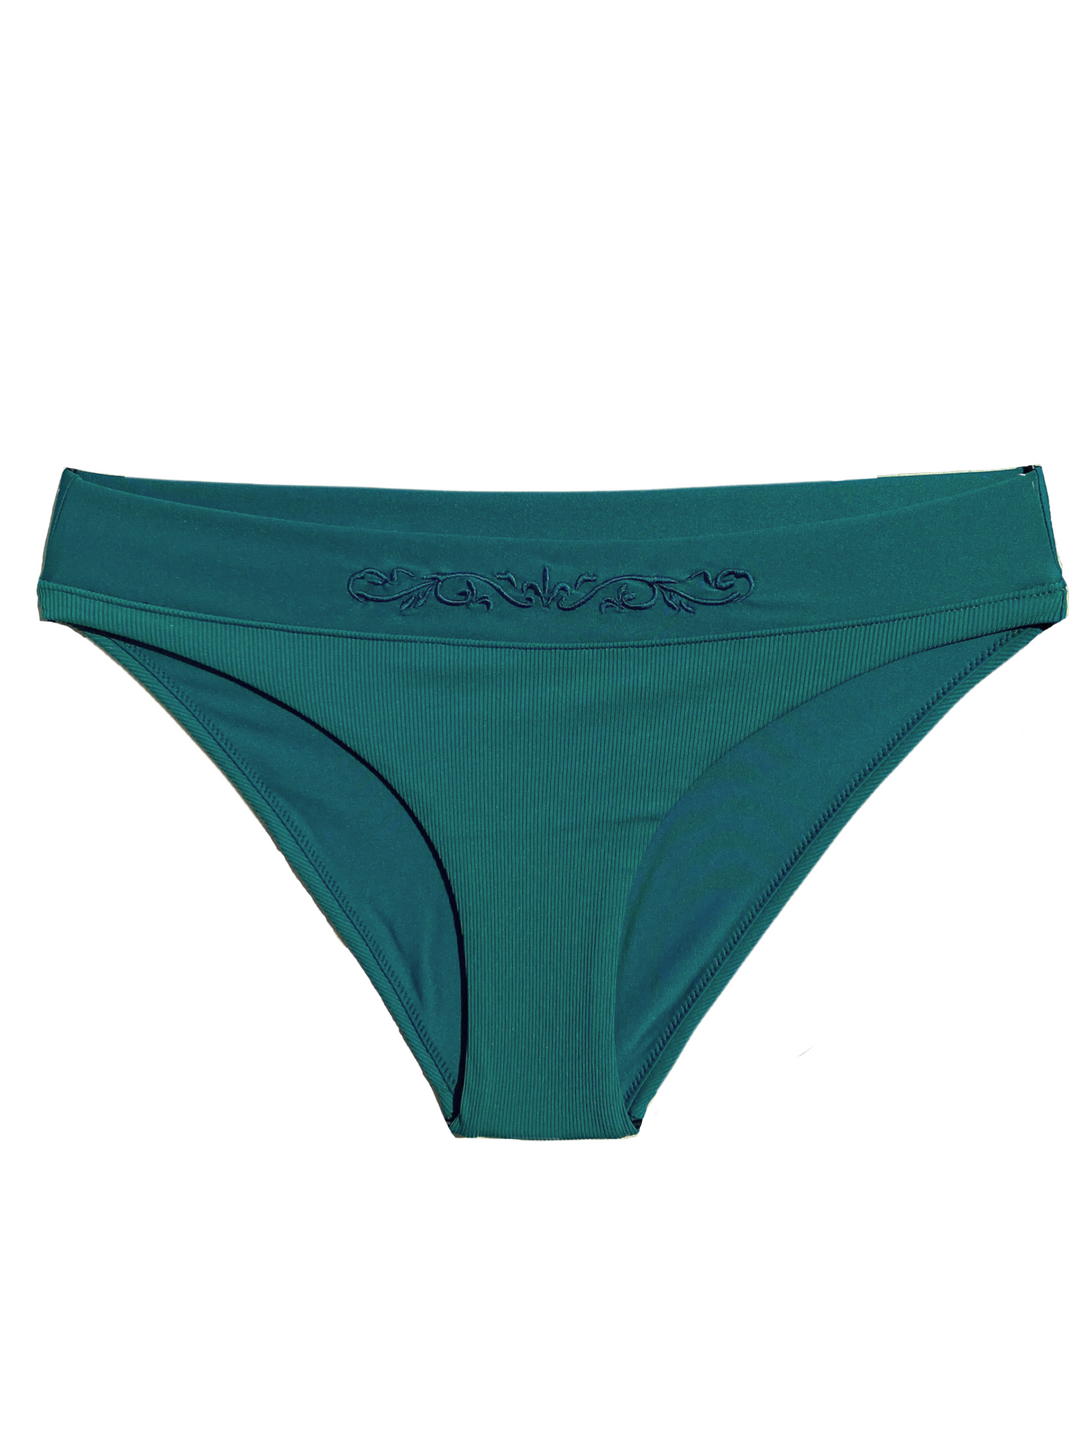 Bikini-bottom-classic-emerald-green-with-rib-fabric-and-embroidery-product-front